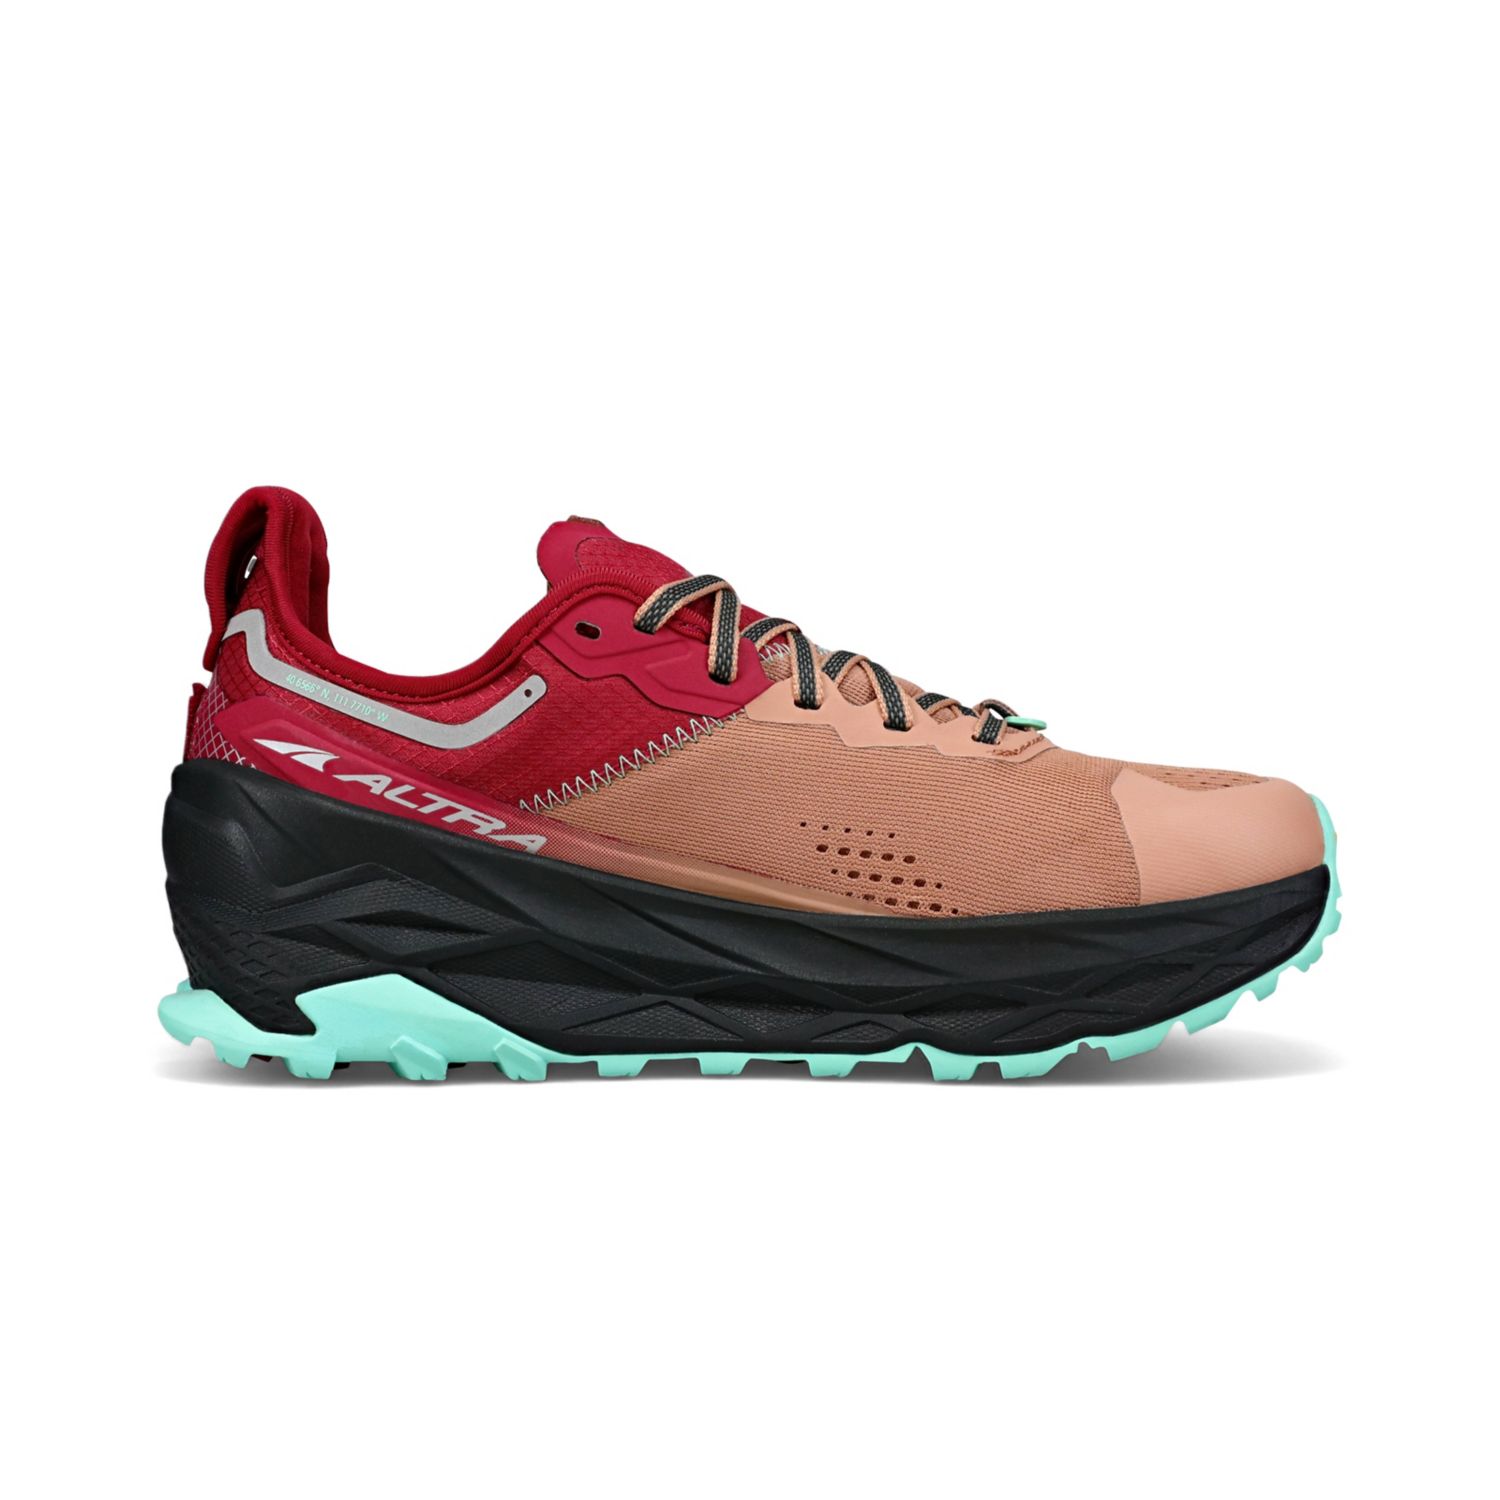 Brown / Red Altra Olympus 5 Women's Trail Running Shoes | Ireland-46513879